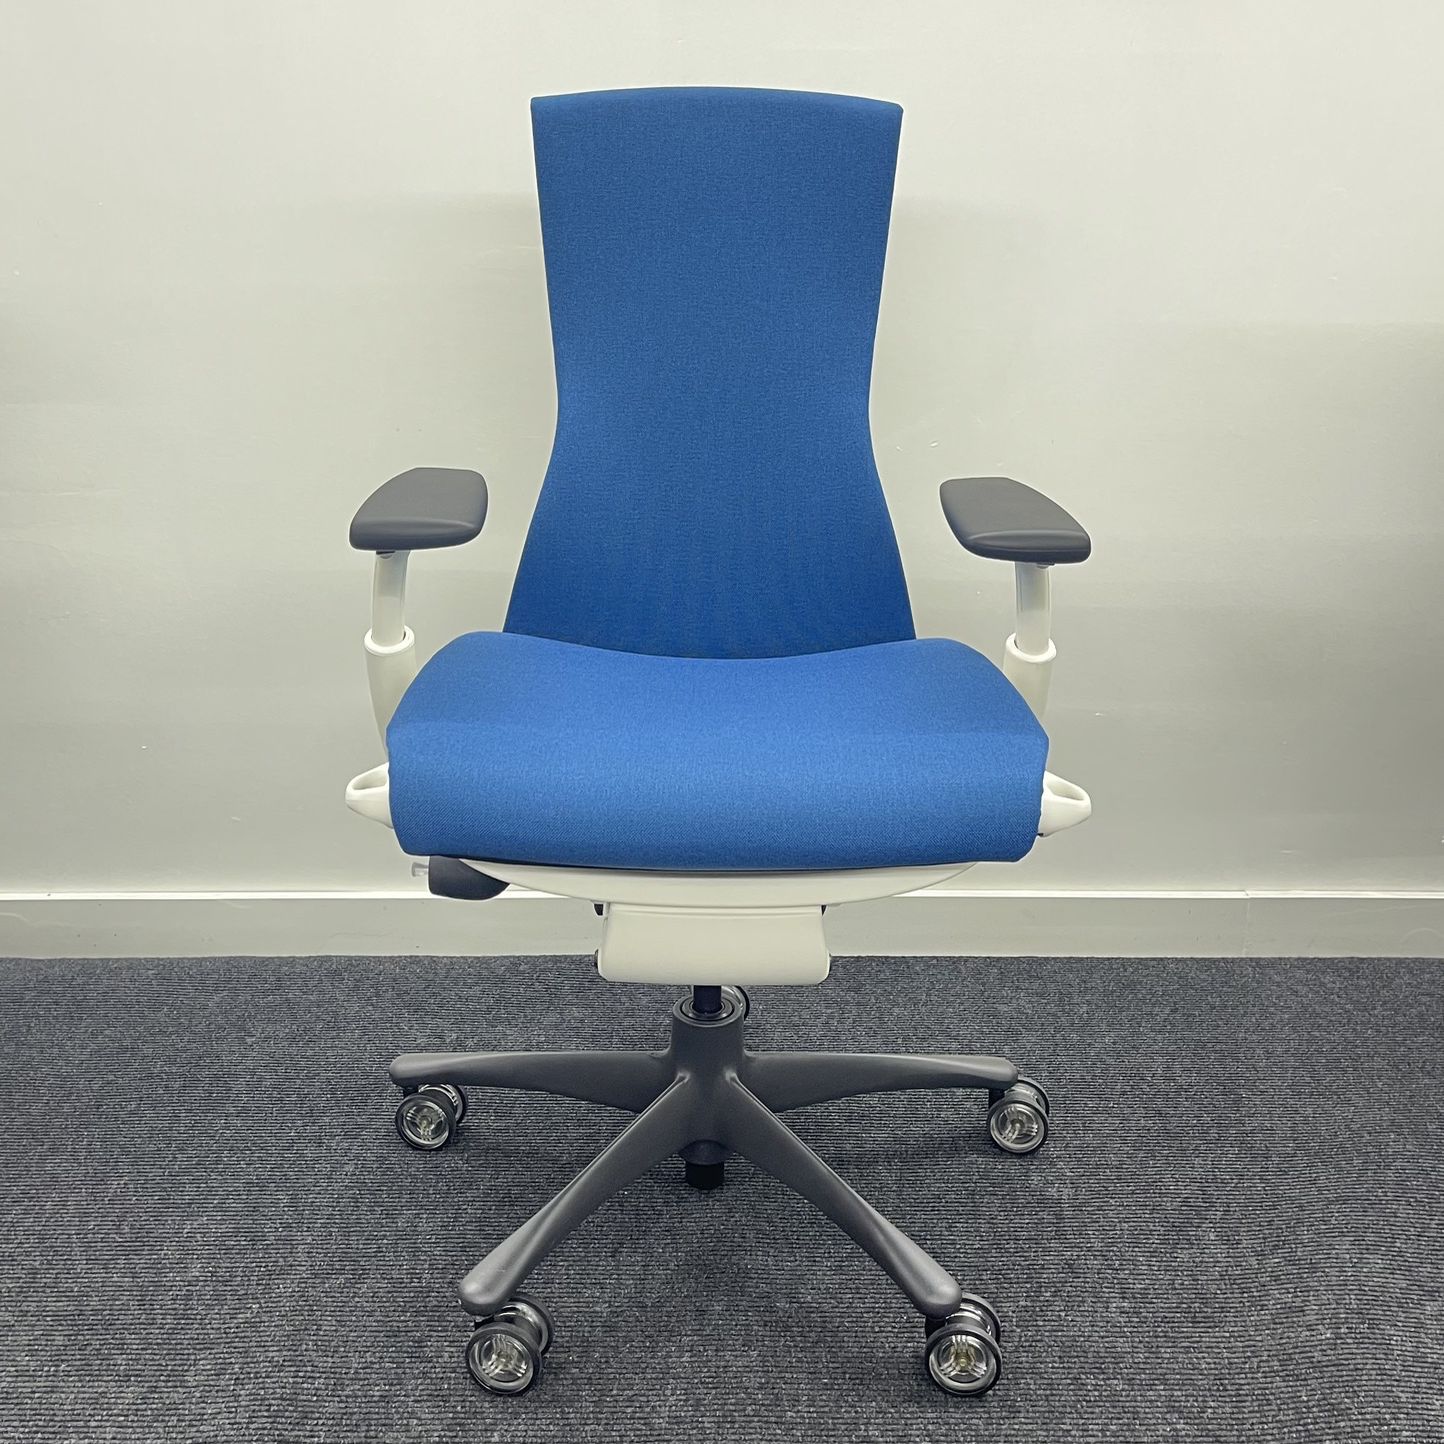 BRAND NEW HERMAN MILLER BLUE GROTTO EMBODY OFFICE CHAIR  🚚🚚DELIVERY AVAILABLE🚚🚚